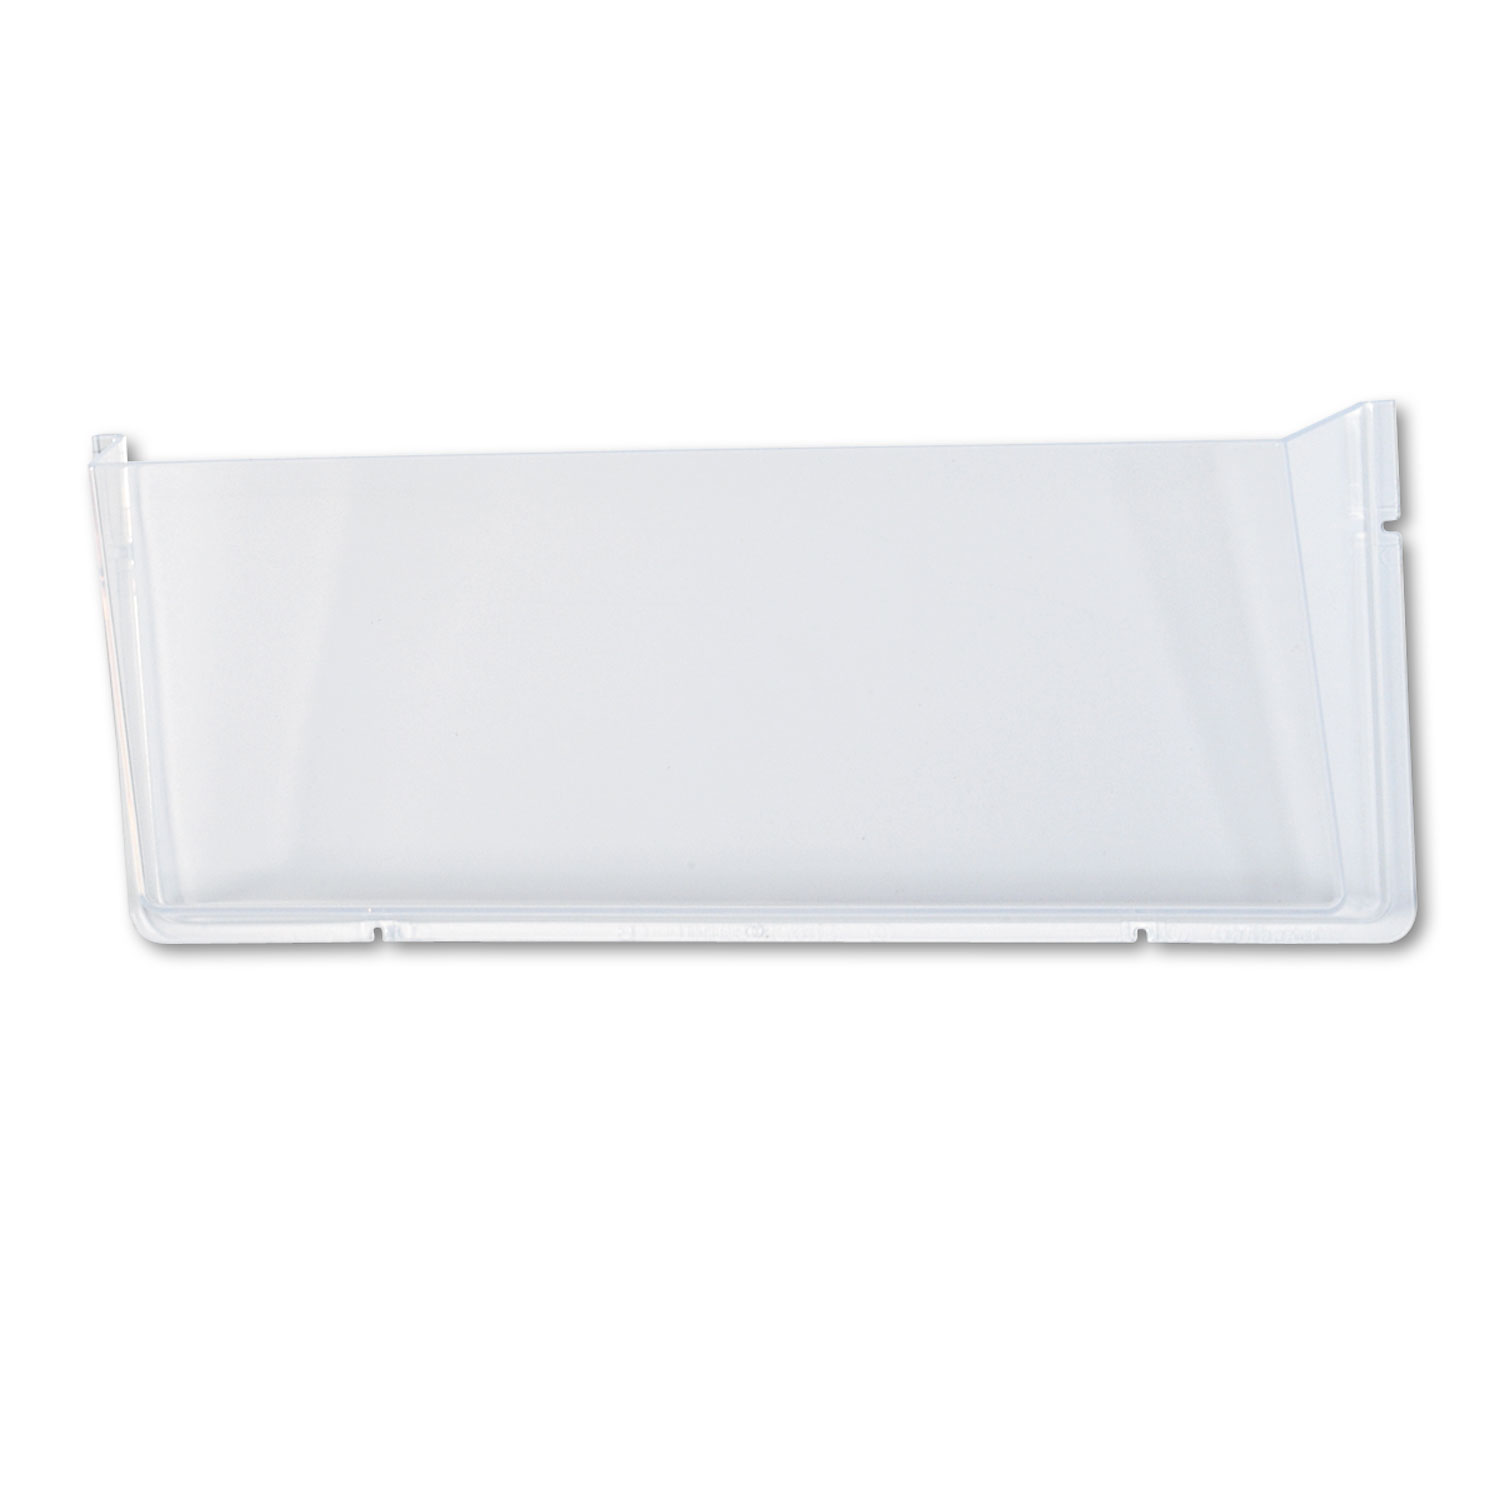  deflecto 64301 Unbreakable DocuPocket Wall File, Legal, 17 1/2 x 3 x 6 1/2, Clear (DEF64301) 